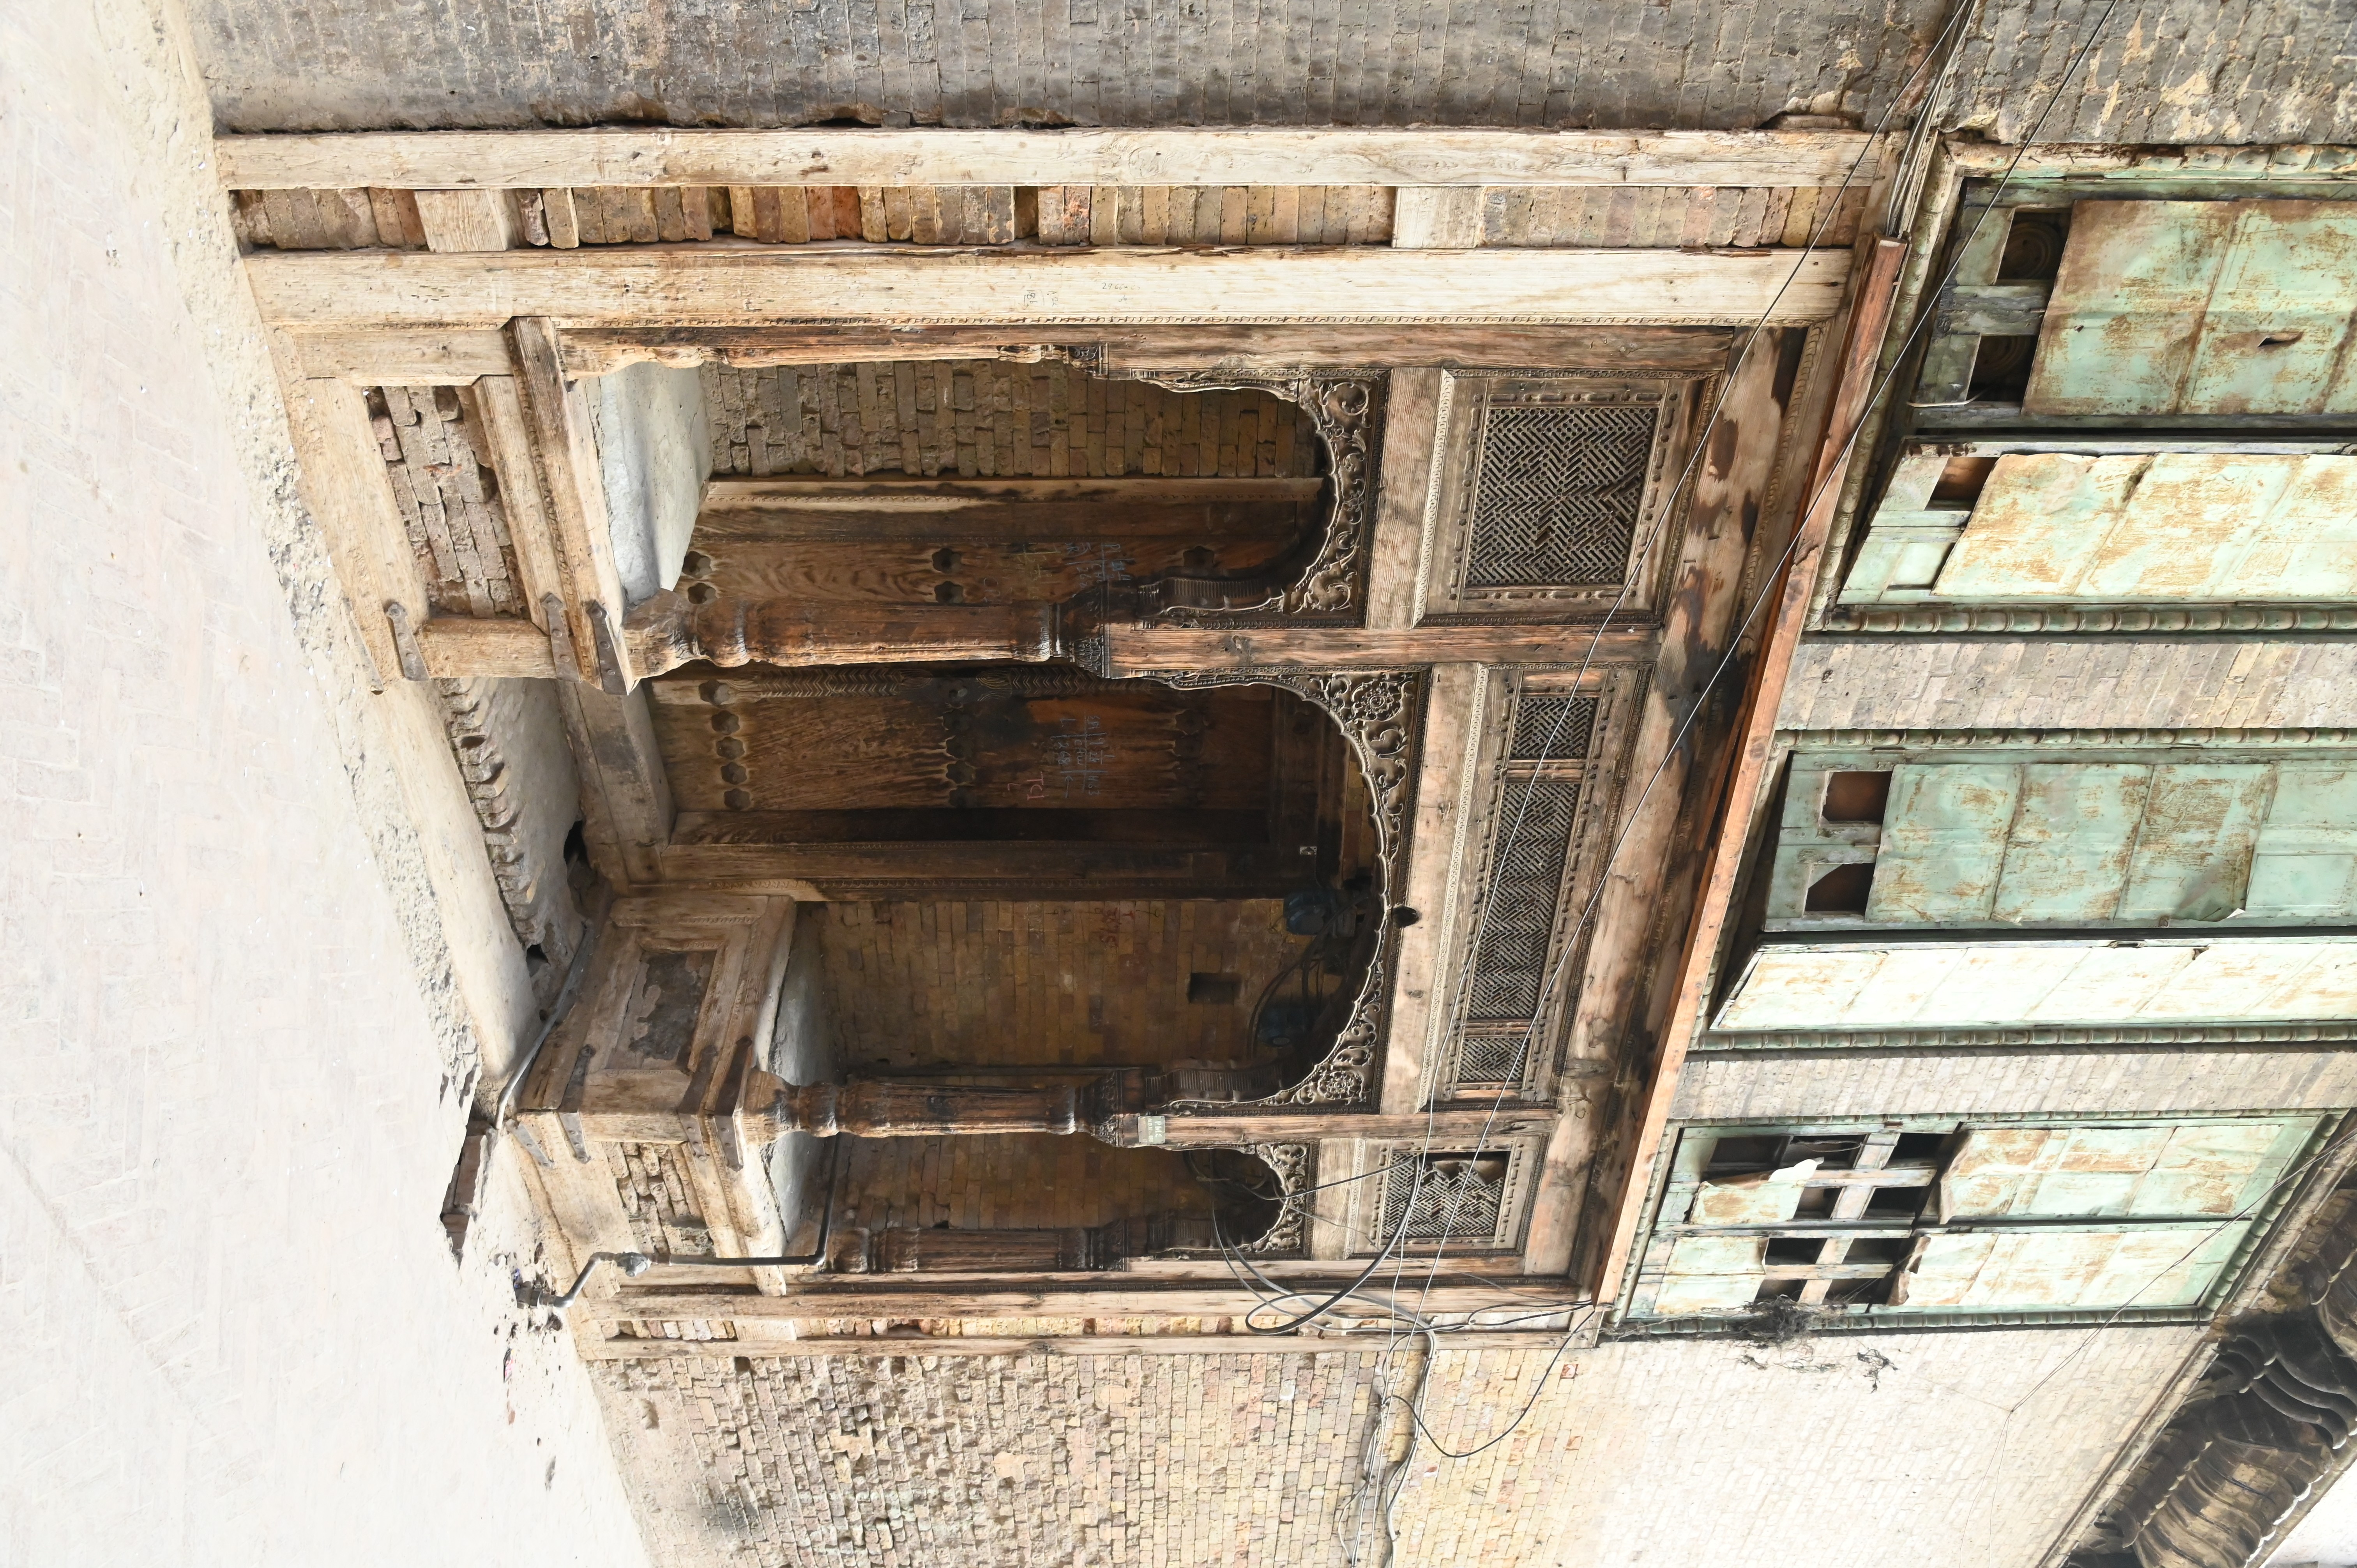 The old deteriorated  house with crumbling beauty located in Sethi Mohalla